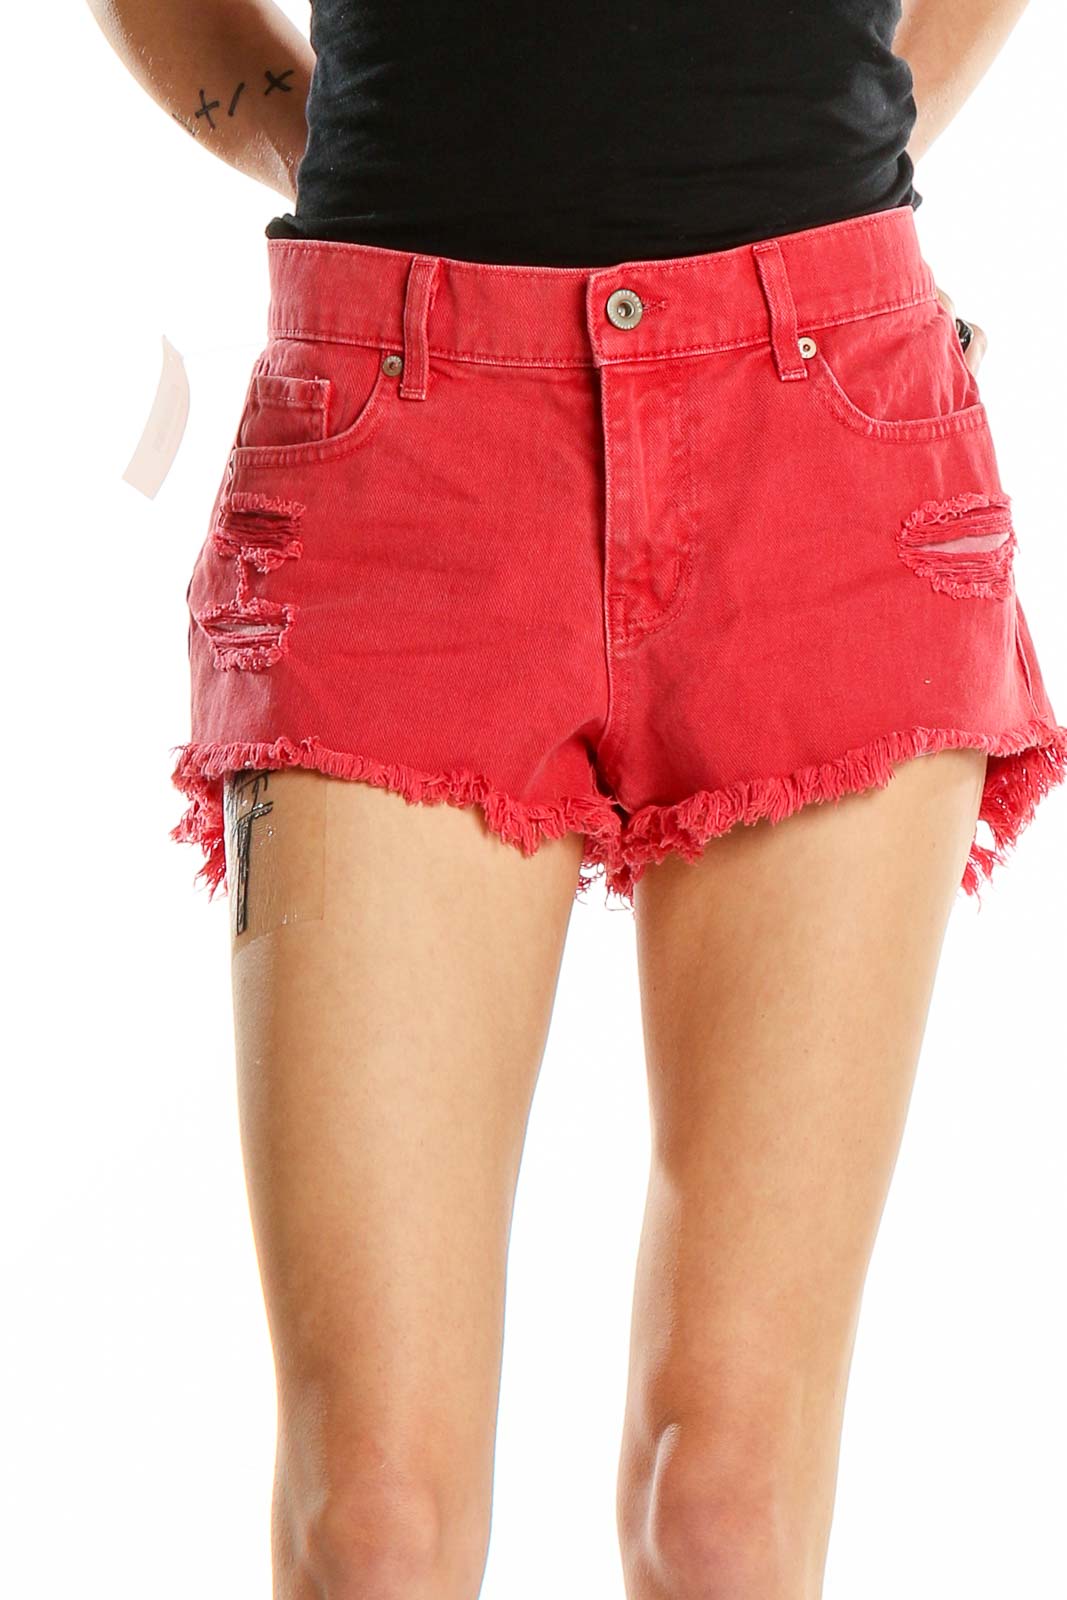 Shop Shorts With Points or SilkRoll | Cash